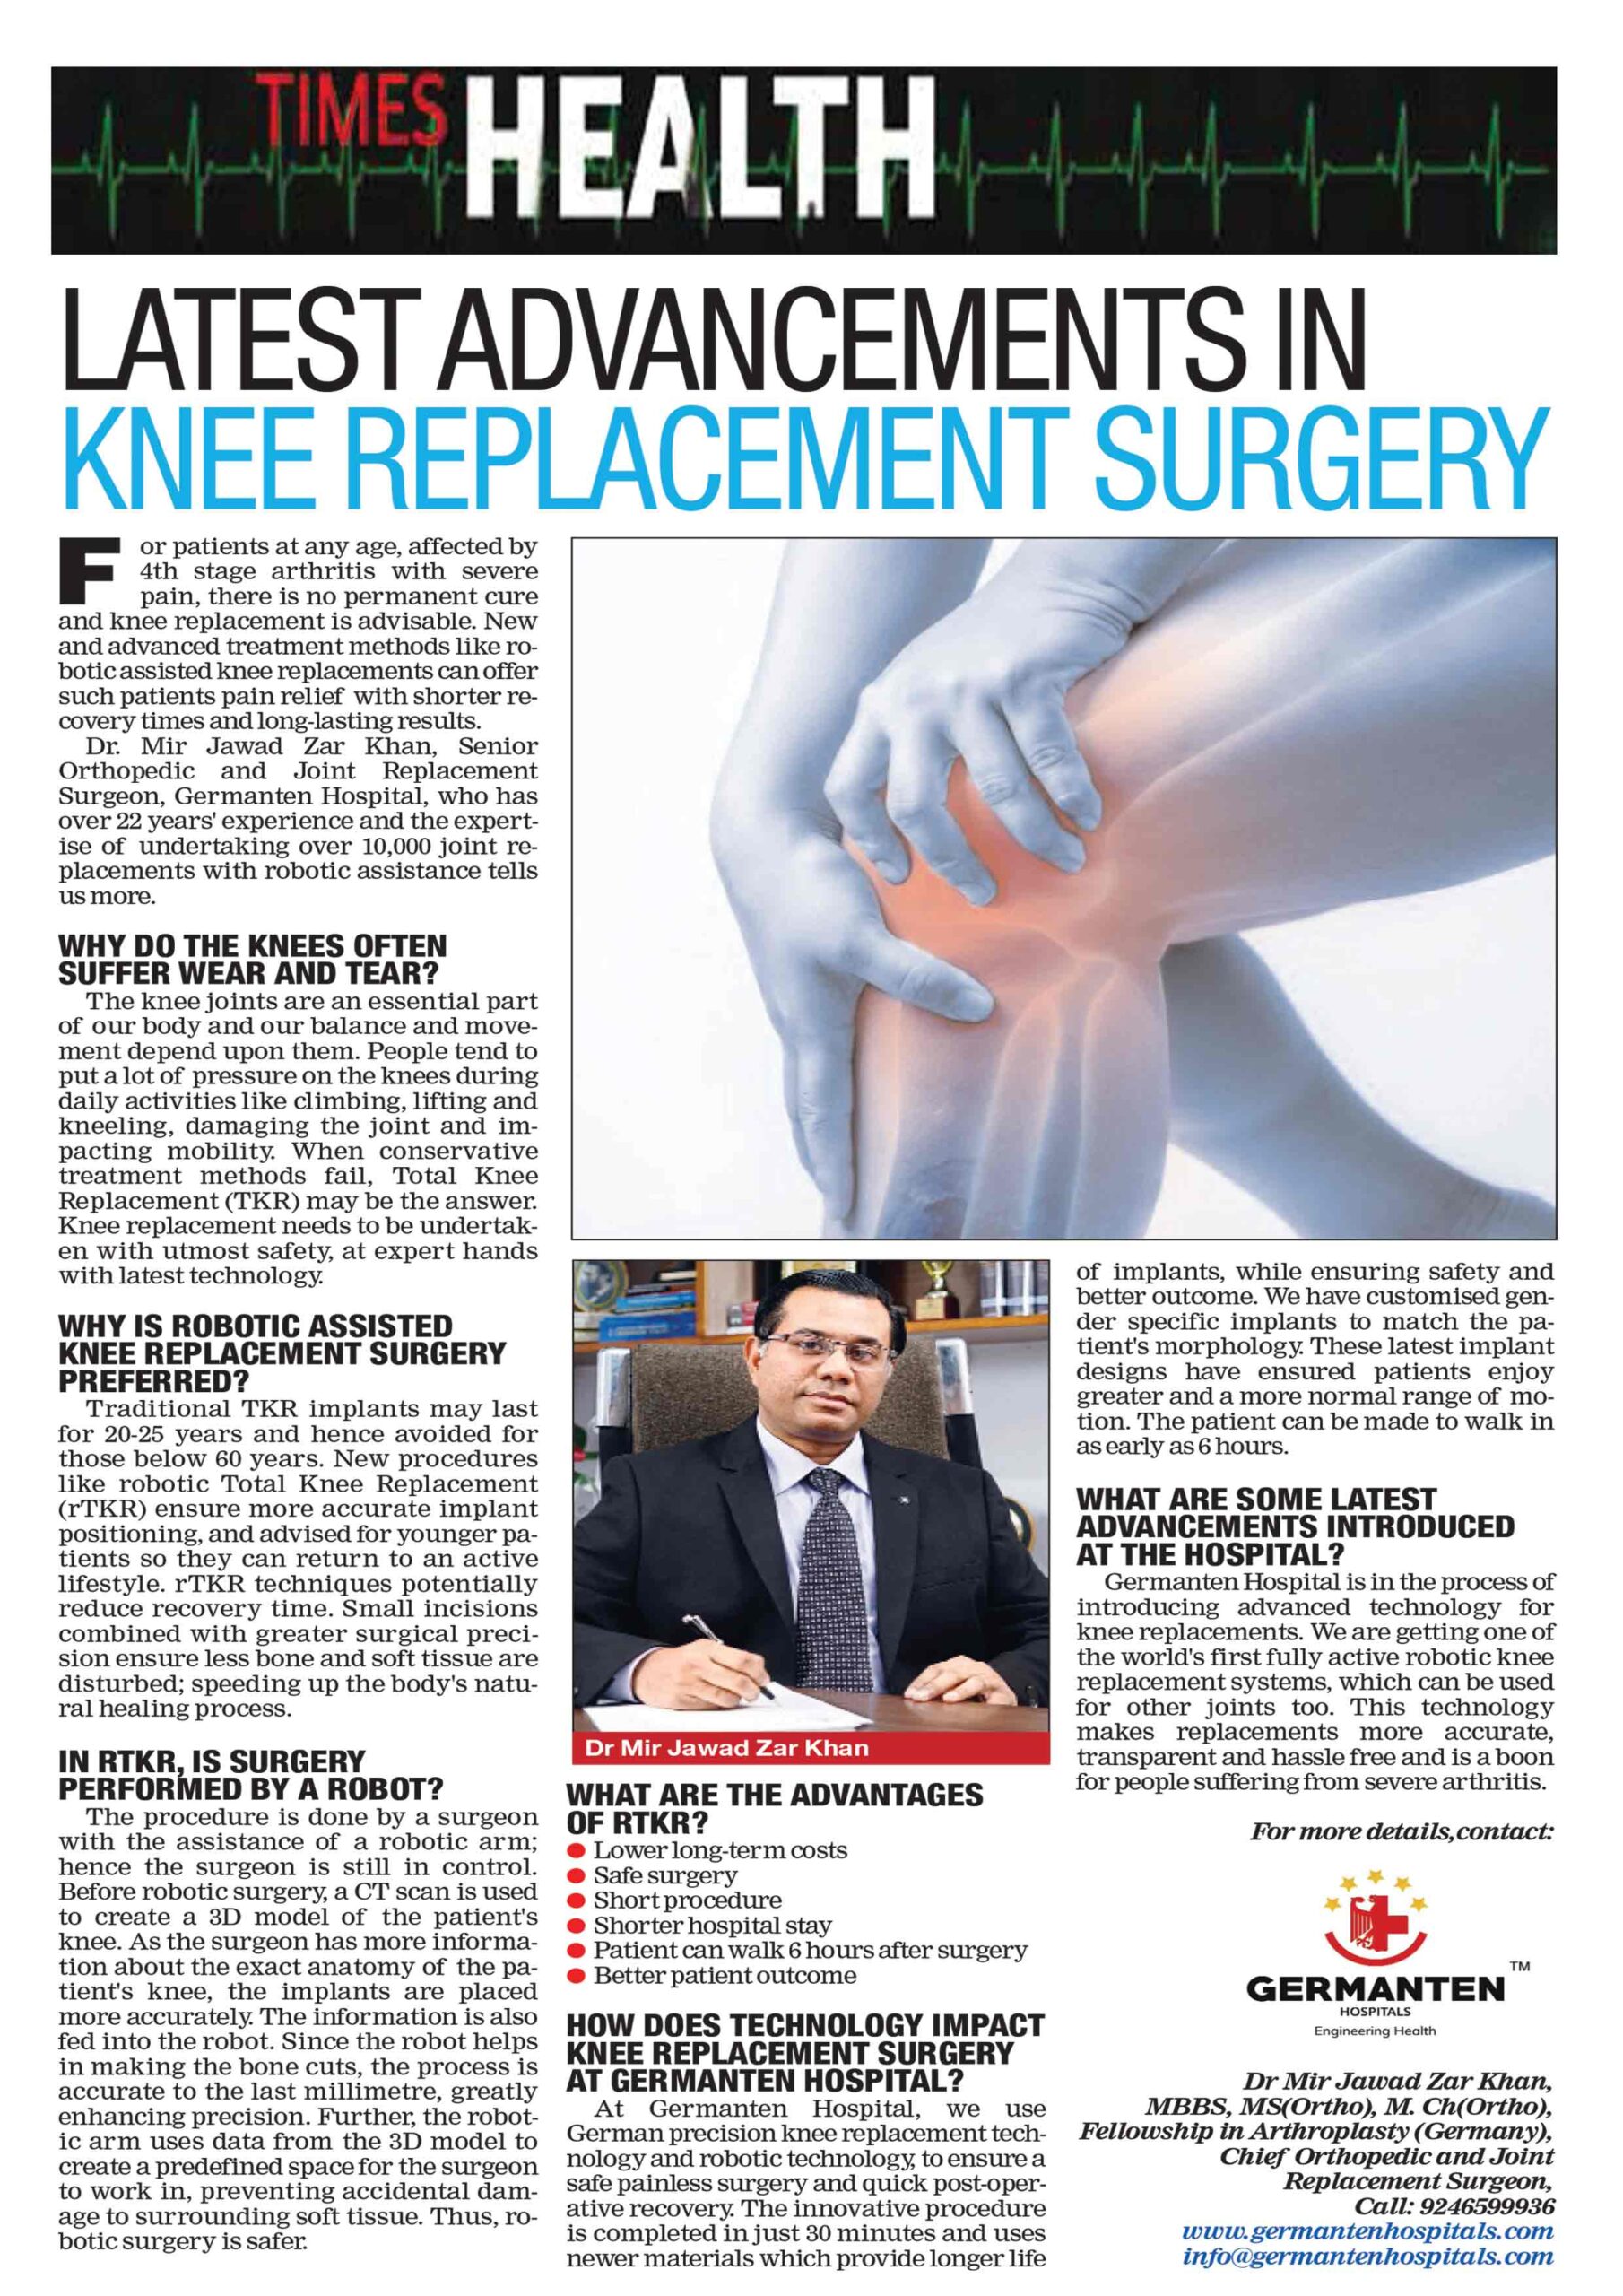 latest advancements in knee replacement surgery.